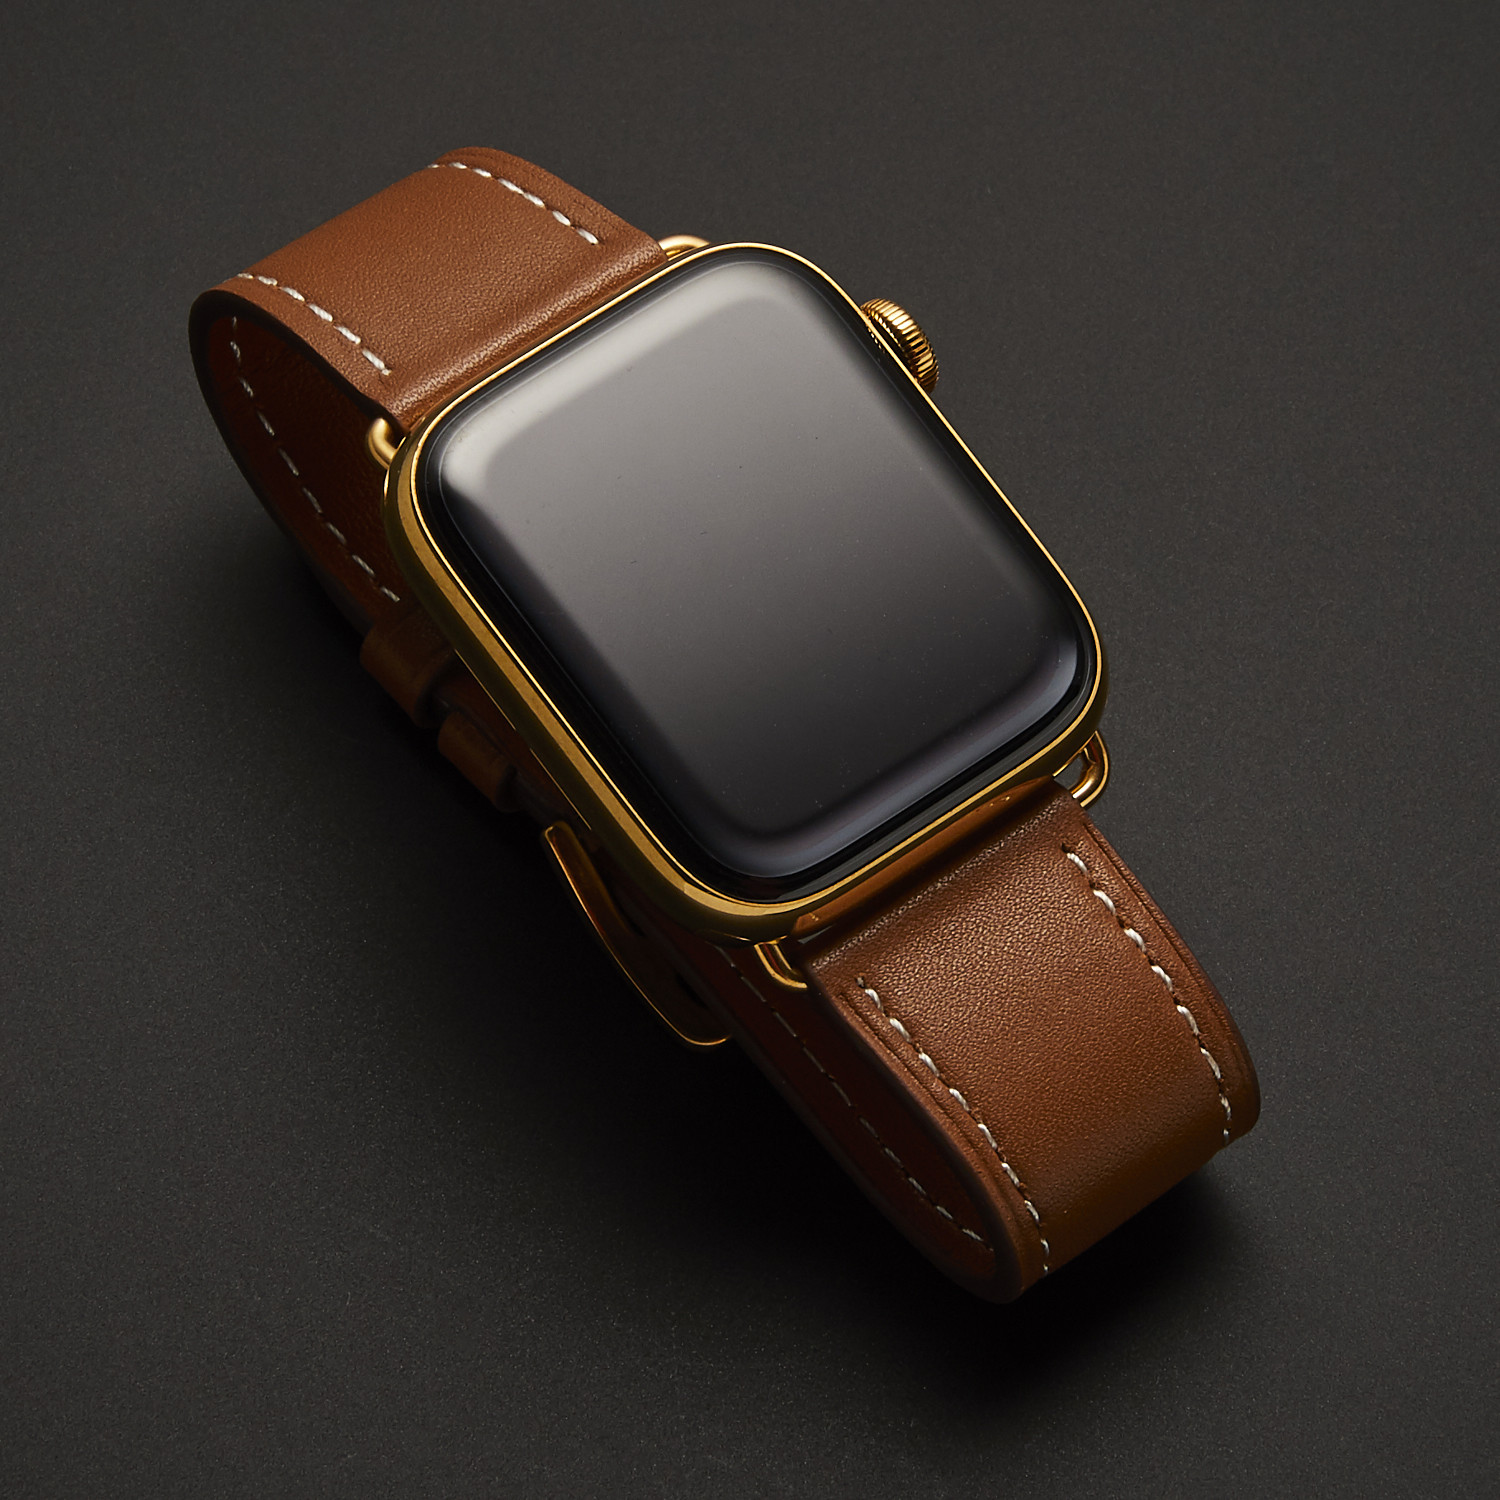 24K Gold Plated Custom Apple Watch Series 5 // Brown Leather Band ...